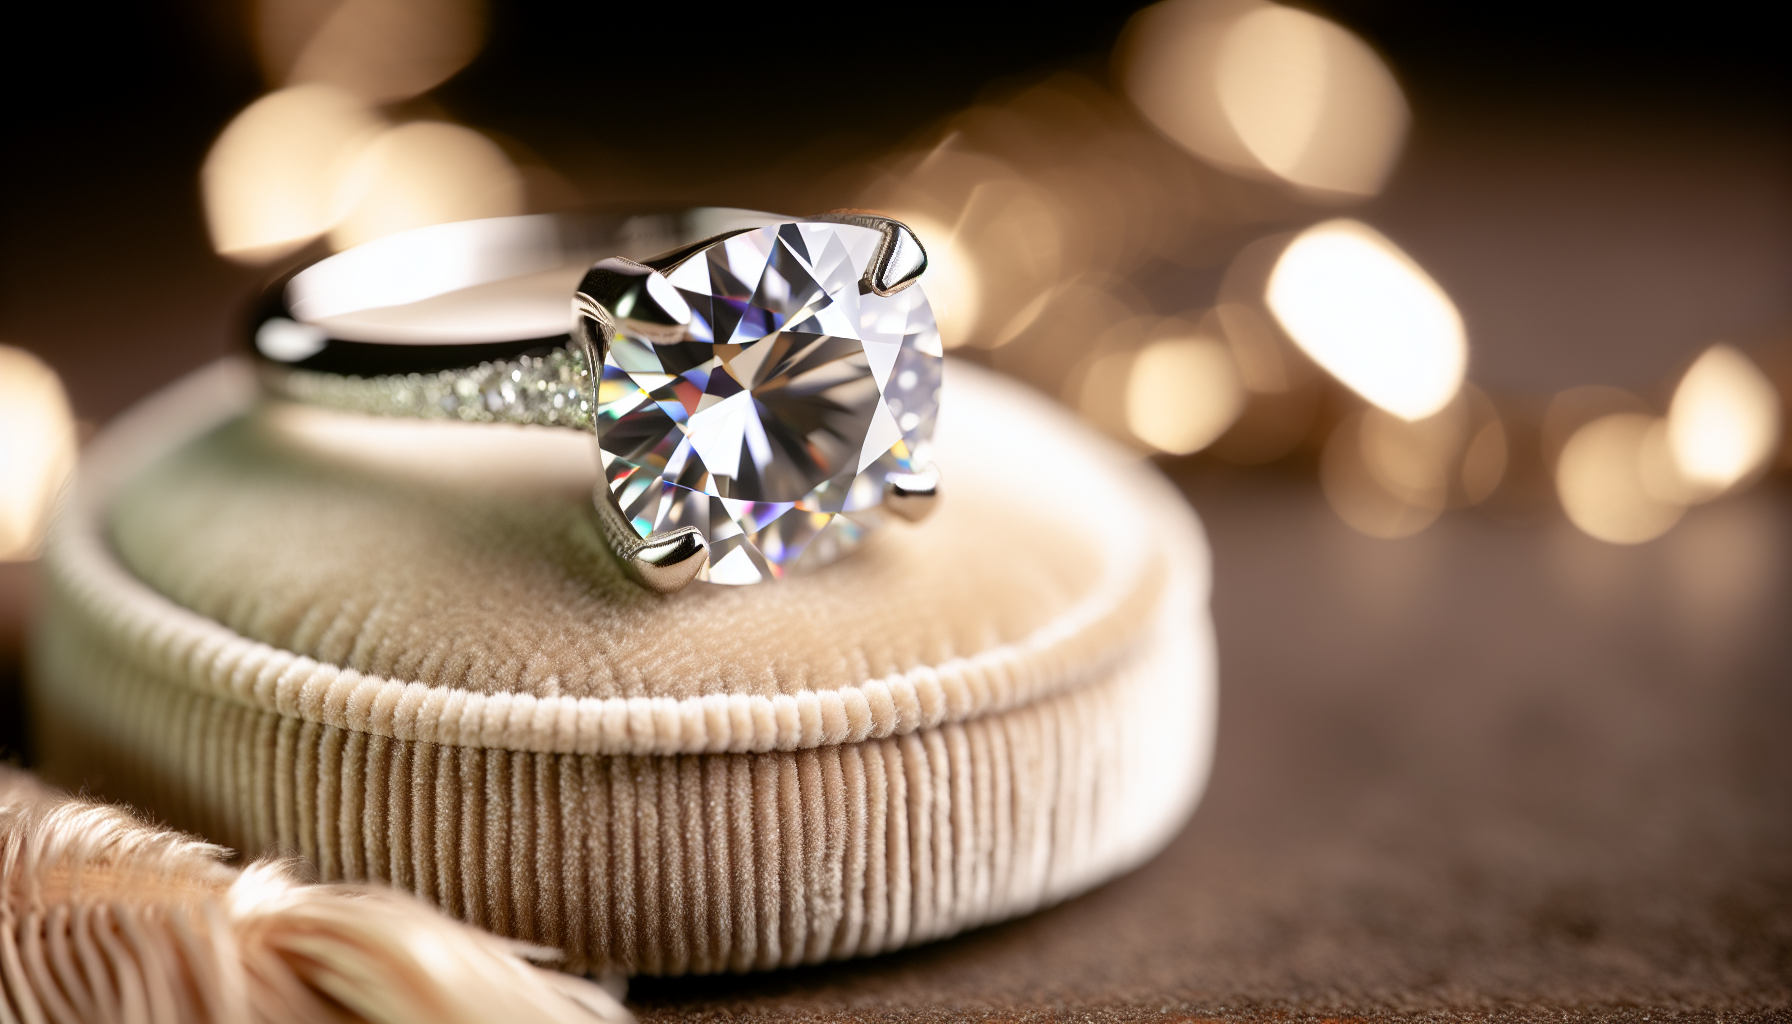 A beautiful moissanite engagement ring with a sparkling gemstone